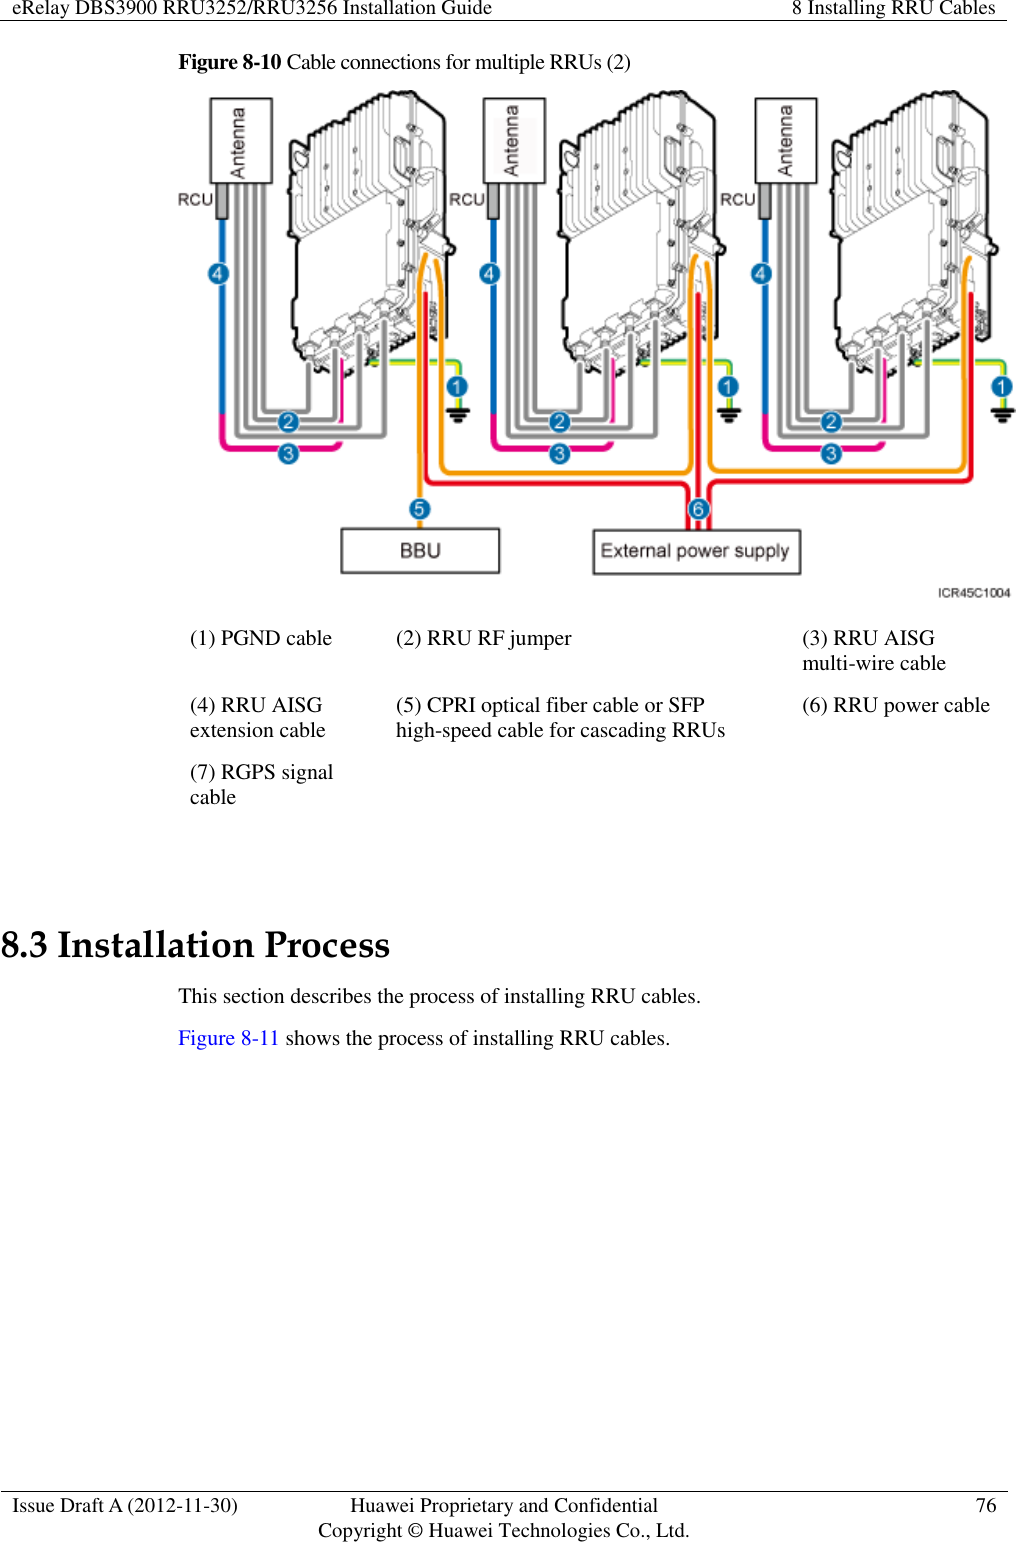 eRelay DBS3900 RRU3252/RRU3256 Installation Guide 8 Installing RRU Cables  Issue Draft A (2012-11-30) Huawei Proprietary and Confidential                                     Copyright © Huawei Technologies Co., Ltd. 76  Figure 8-10 Cable connections for multiple RRUs (2)  (1) PGND cable (2) RRU RF jumper (3) RRU AISG multi-wire cable (4) RRU AISG extension cable (5) CPRI optical fiber cable or SFP high-speed cable for cascading RRUs (6) RRU power cable (7) RGPS signal cable    8.3 Installation Process This section describes the process of installing RRU cables. Figure 8-11 shows the process of installing RRU cables. 